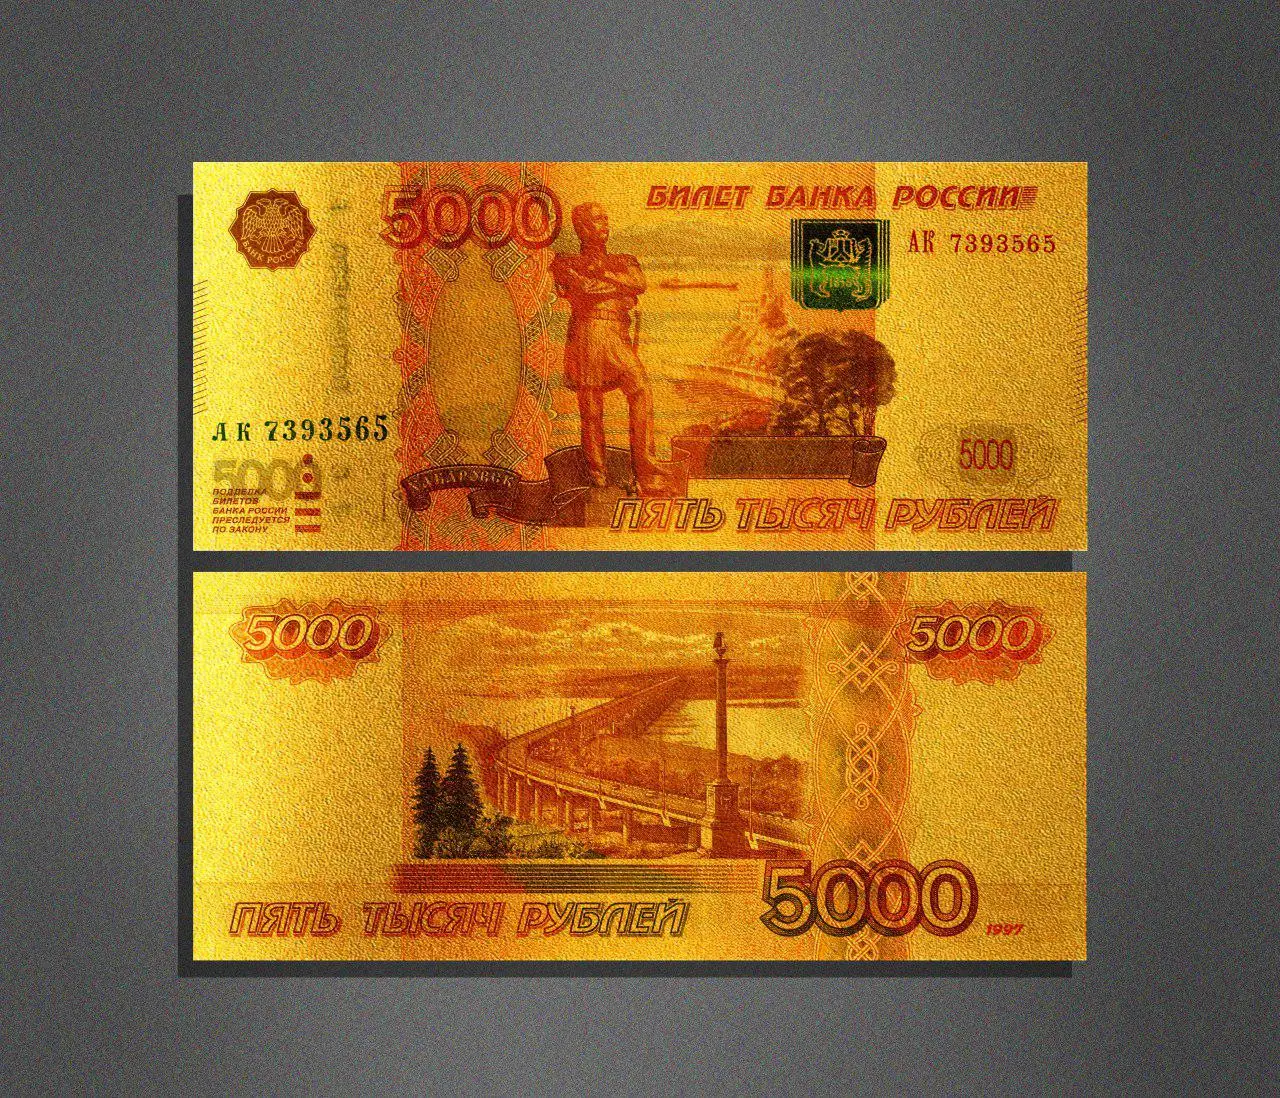 Gold Banknotes 500 Russian Rubles Foil Paper Money Dollar Art Crafts for Gifts 